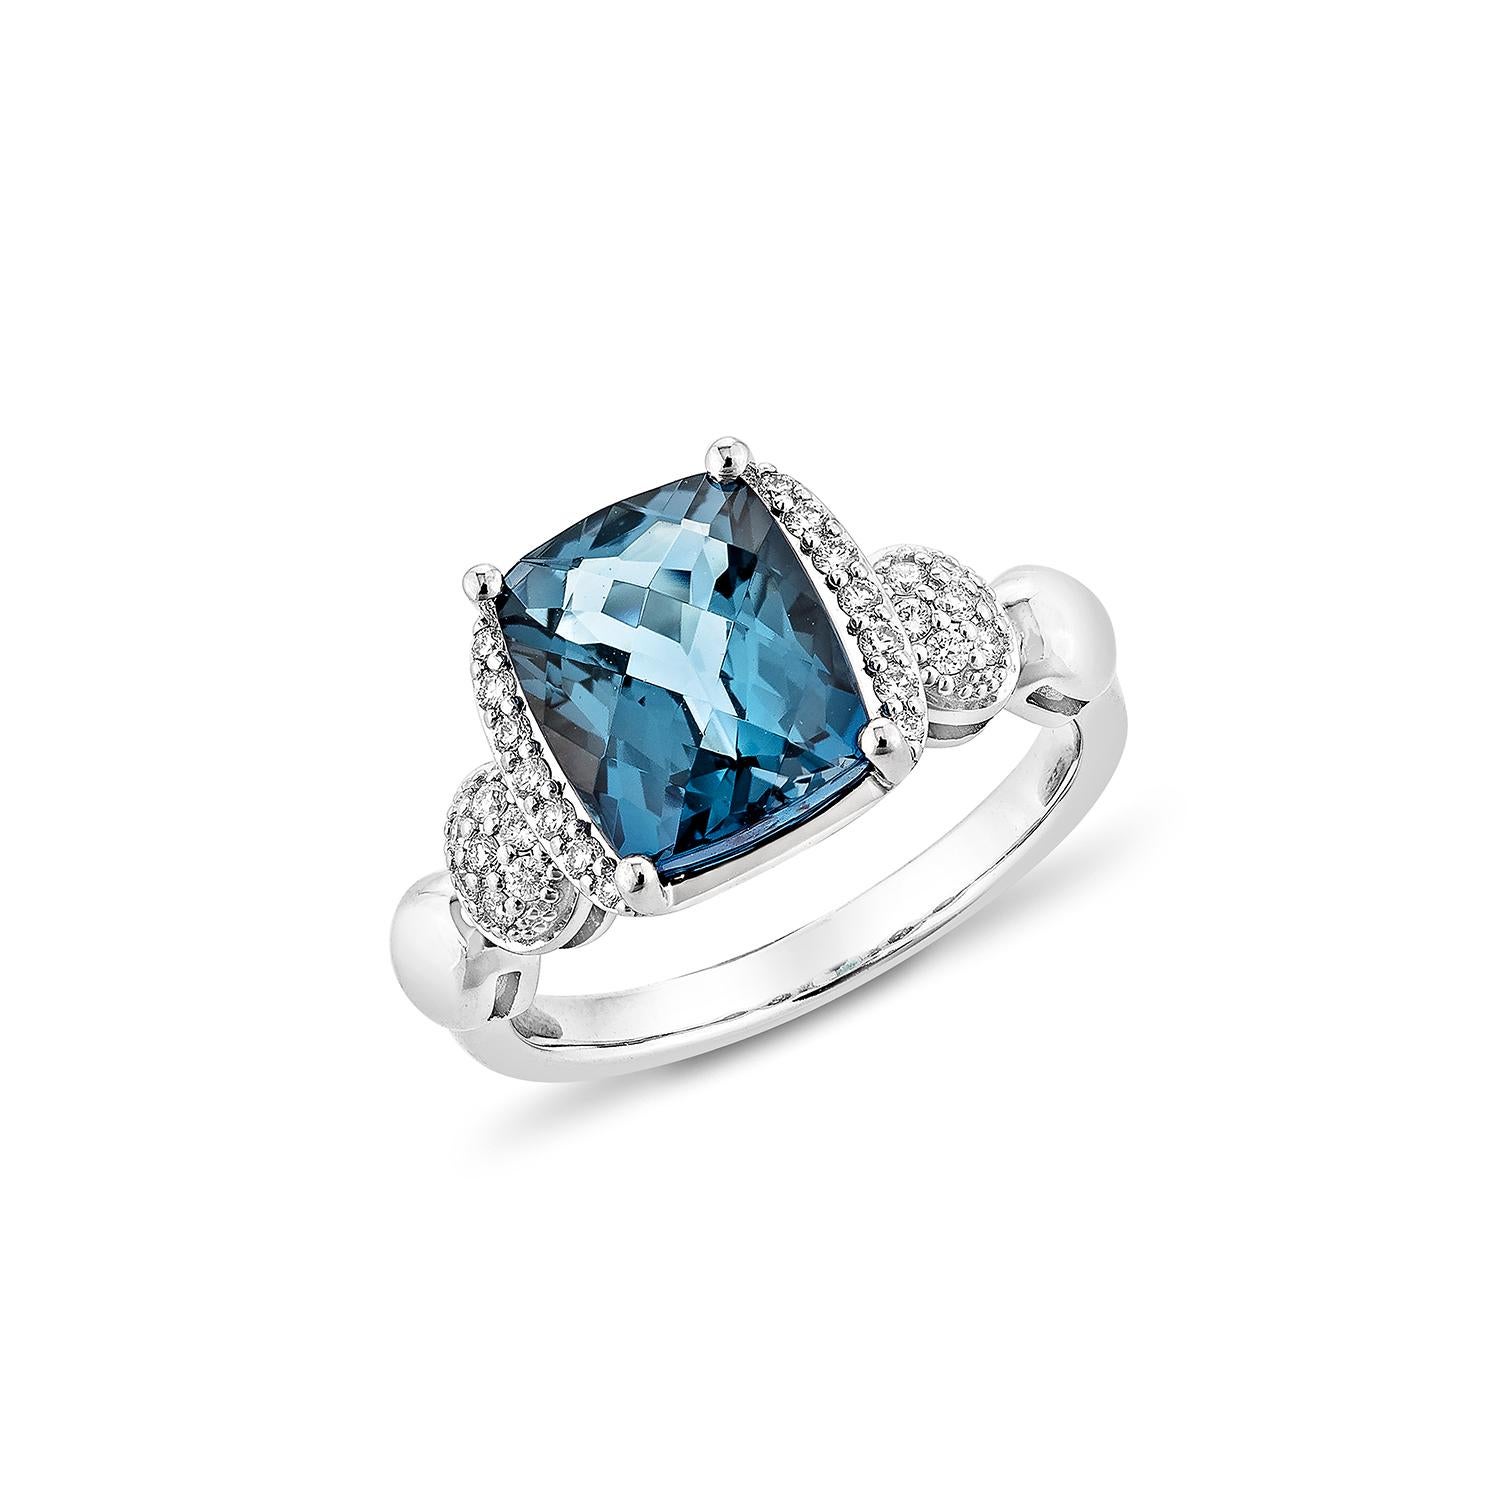 Contemporary 4.11 Carat London Blue Topaz Fancy Ring in 18Karat White Gold with Diamond. For Sale